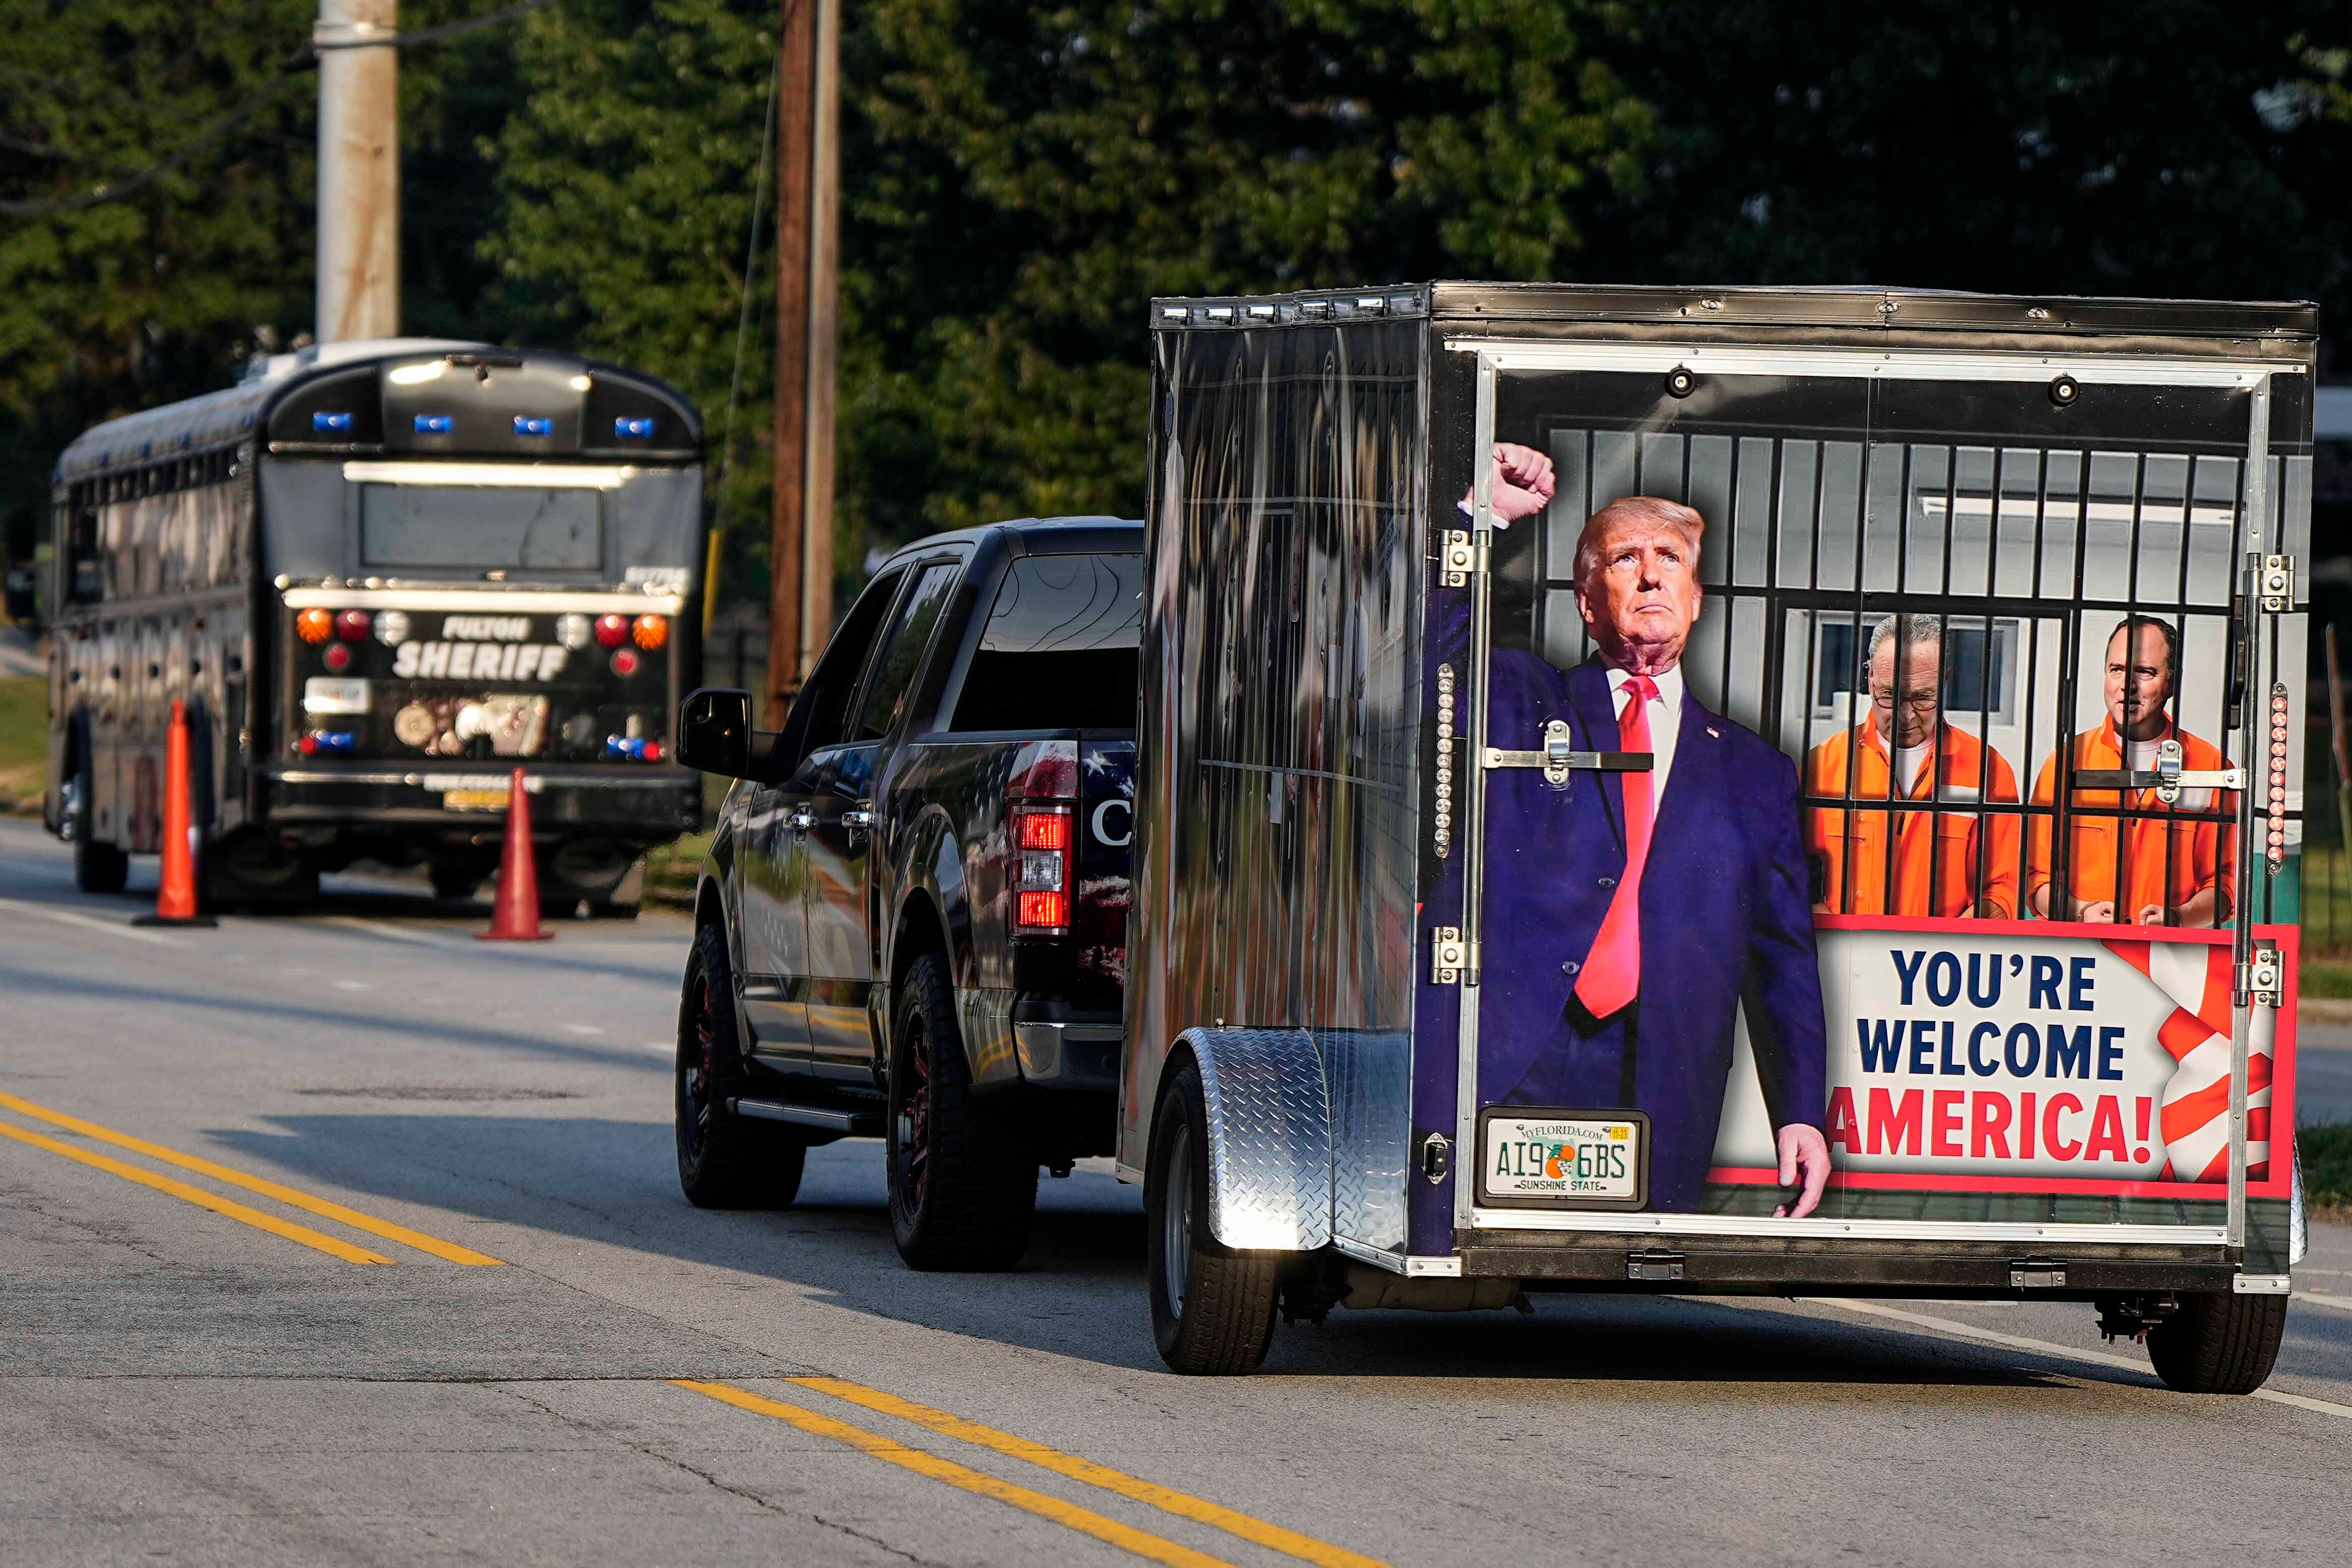 A Trump supporter drives a trailer depicting adversaries of the former president behind bars